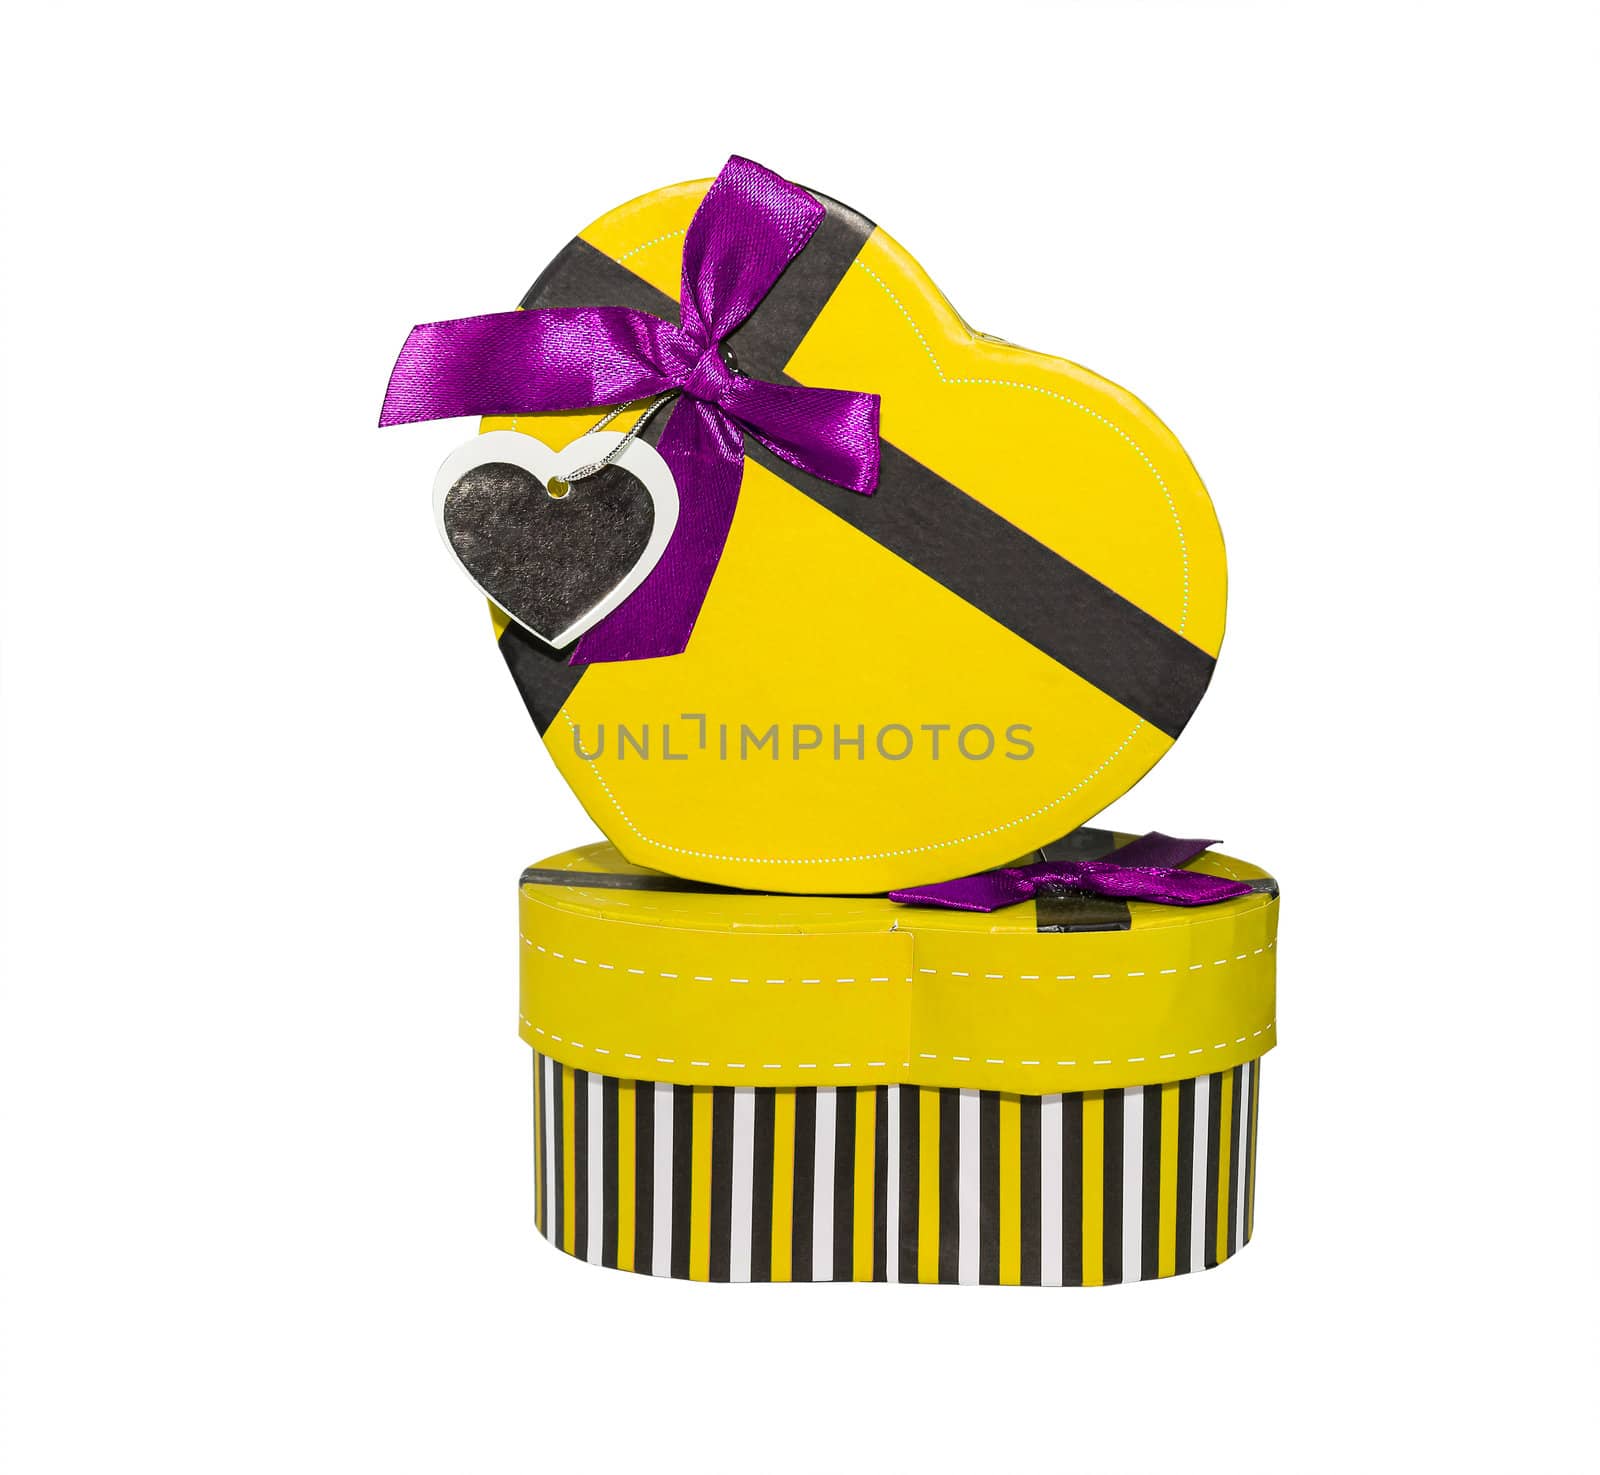 Yellow Heart shaped box in heart shape on white background